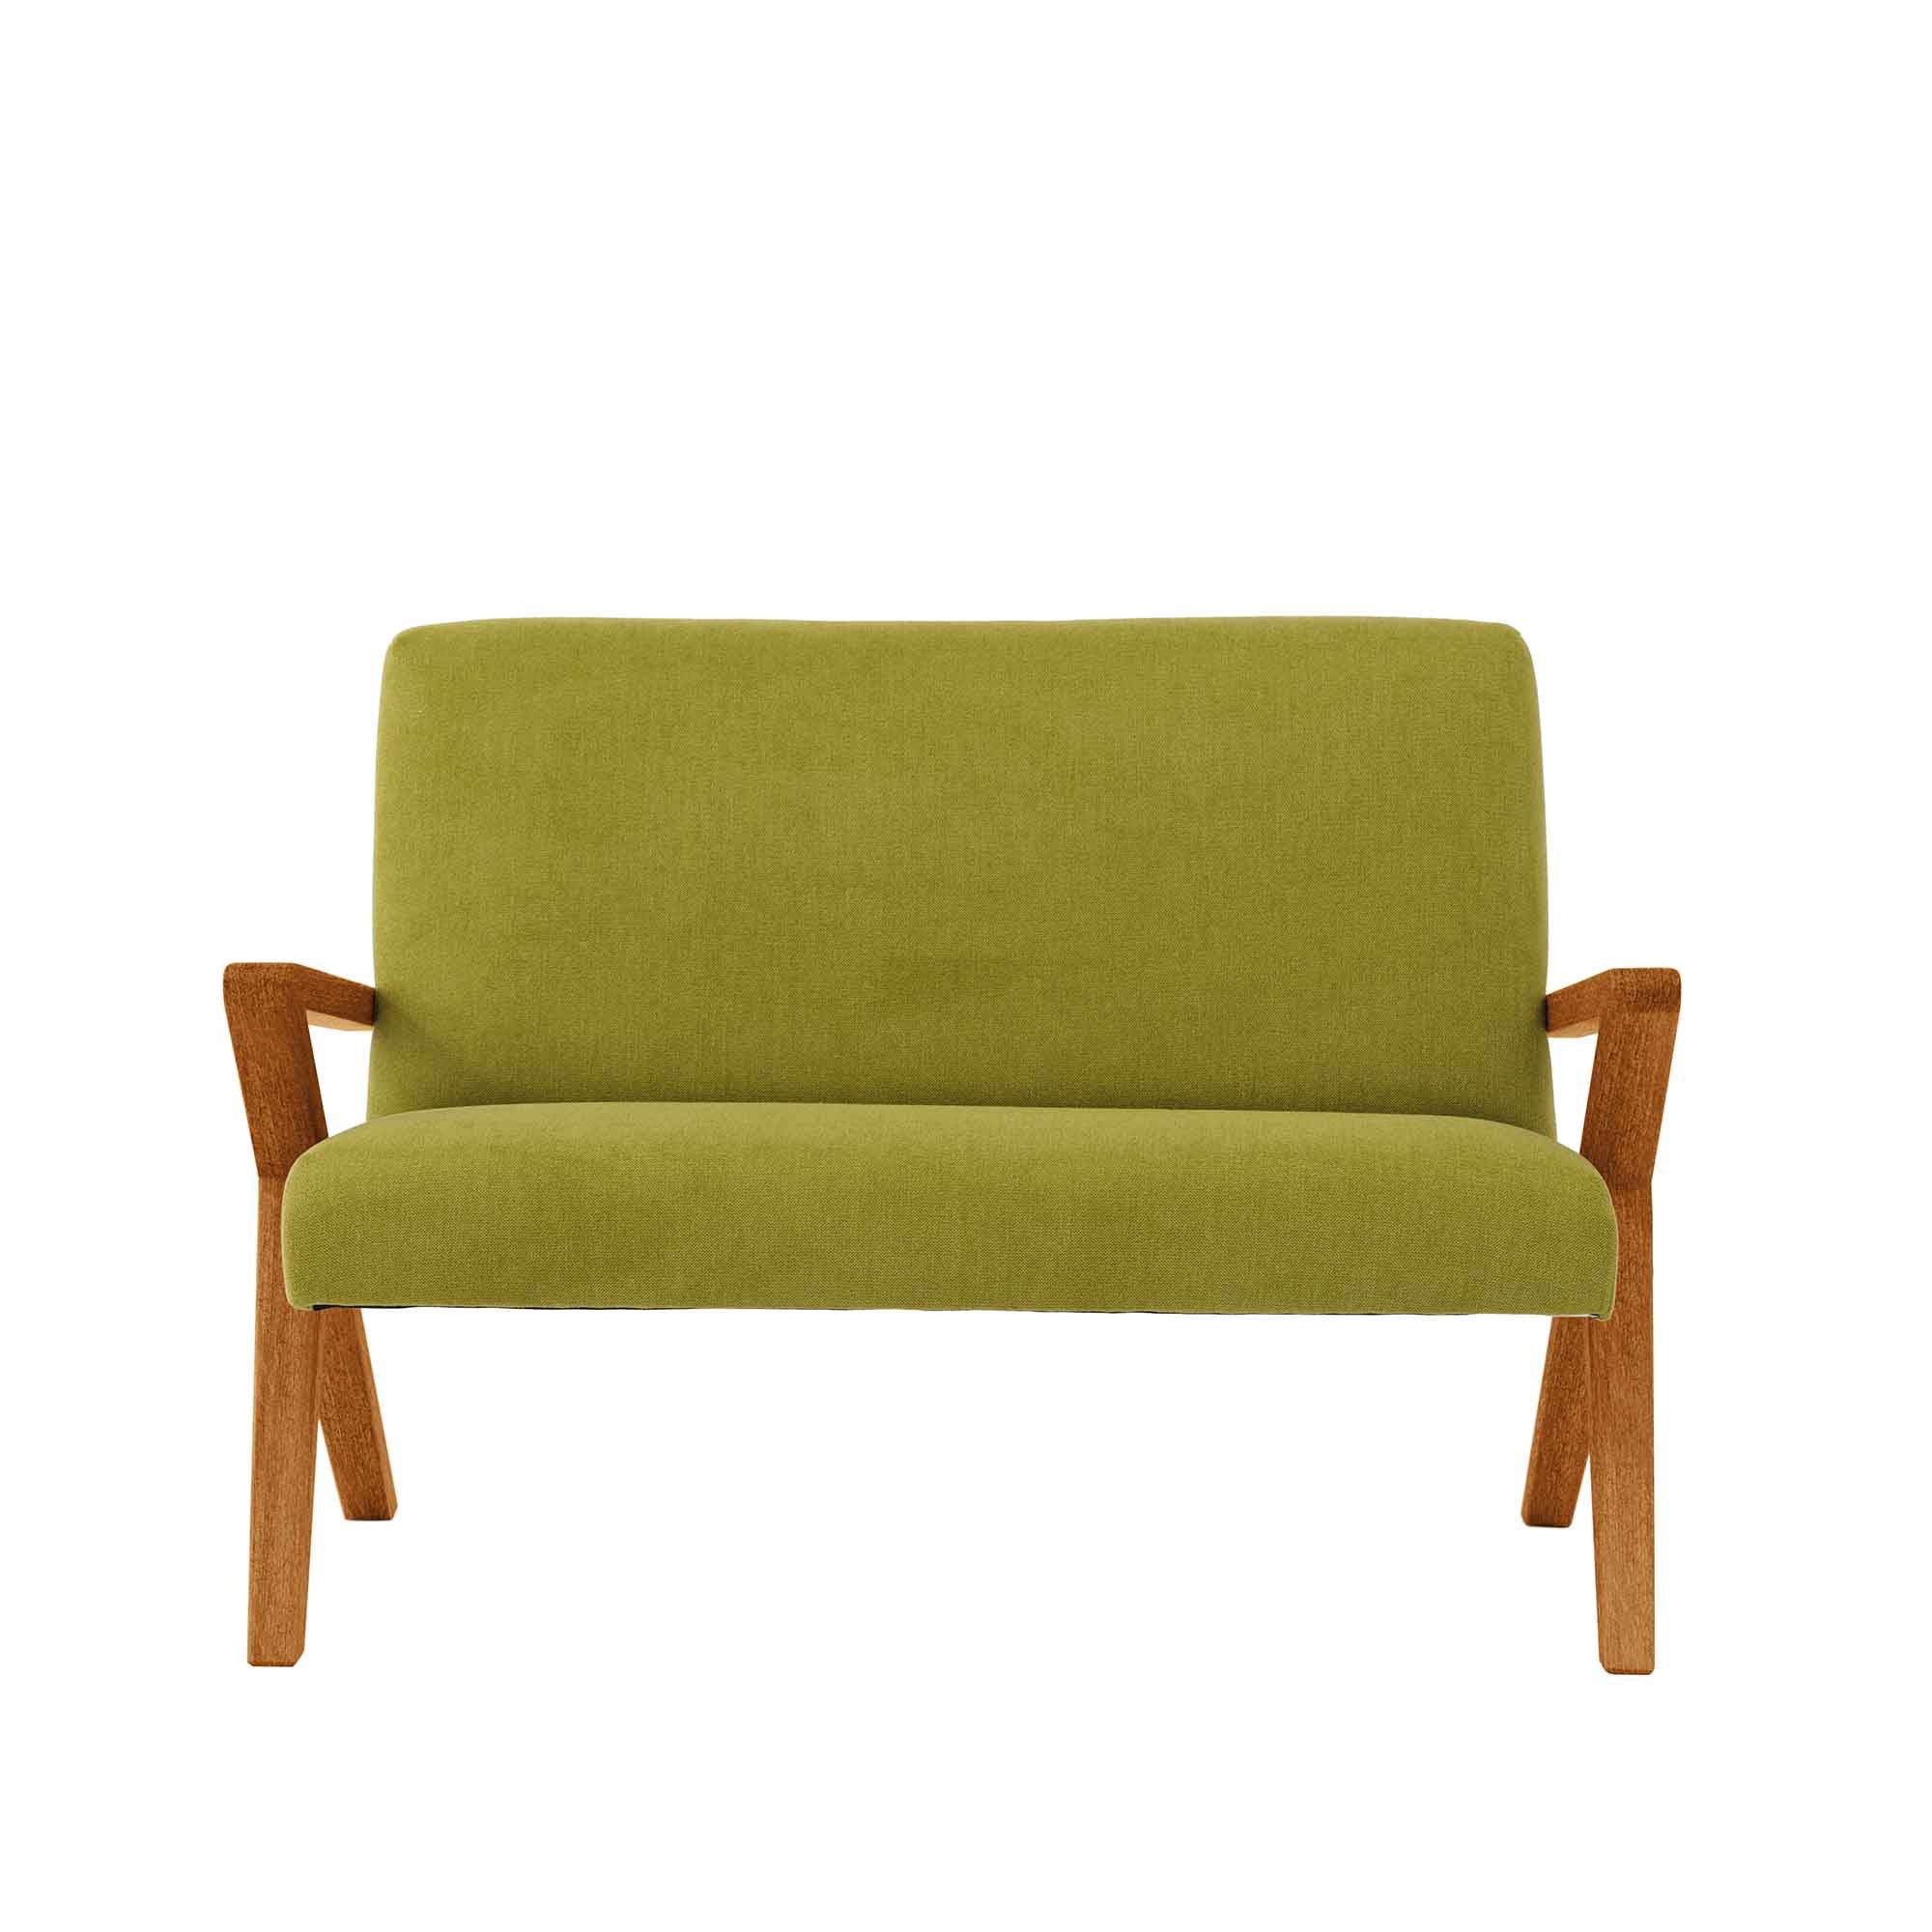 2 Seater Sofa, Beech Wood Frame, Oak Colour green fabric, front view